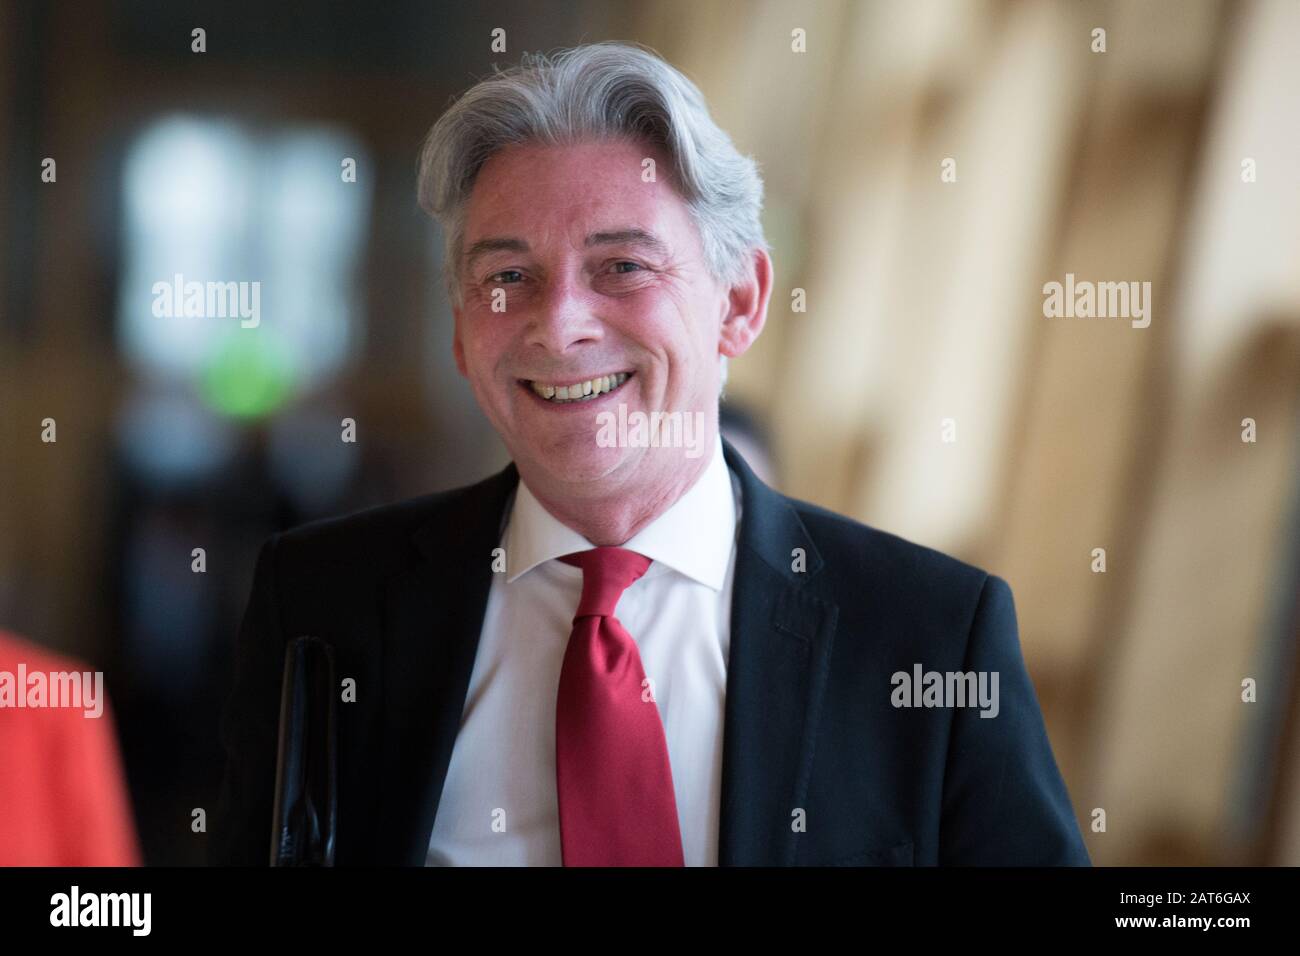 Edinburgh, UK. 30 January 2020.   Pictured: Richard Leonard MSP - Leader of the Scottish Labour Party. The last First Ministers Questions at the Scottish Parliament before the UK leaves the EU, and on the day after which Holyrood voted to hold its second independence referendum, the chamber today had some heated exchanges.  Credit: Colin Fisher/Alamy Live News. Stock Photo